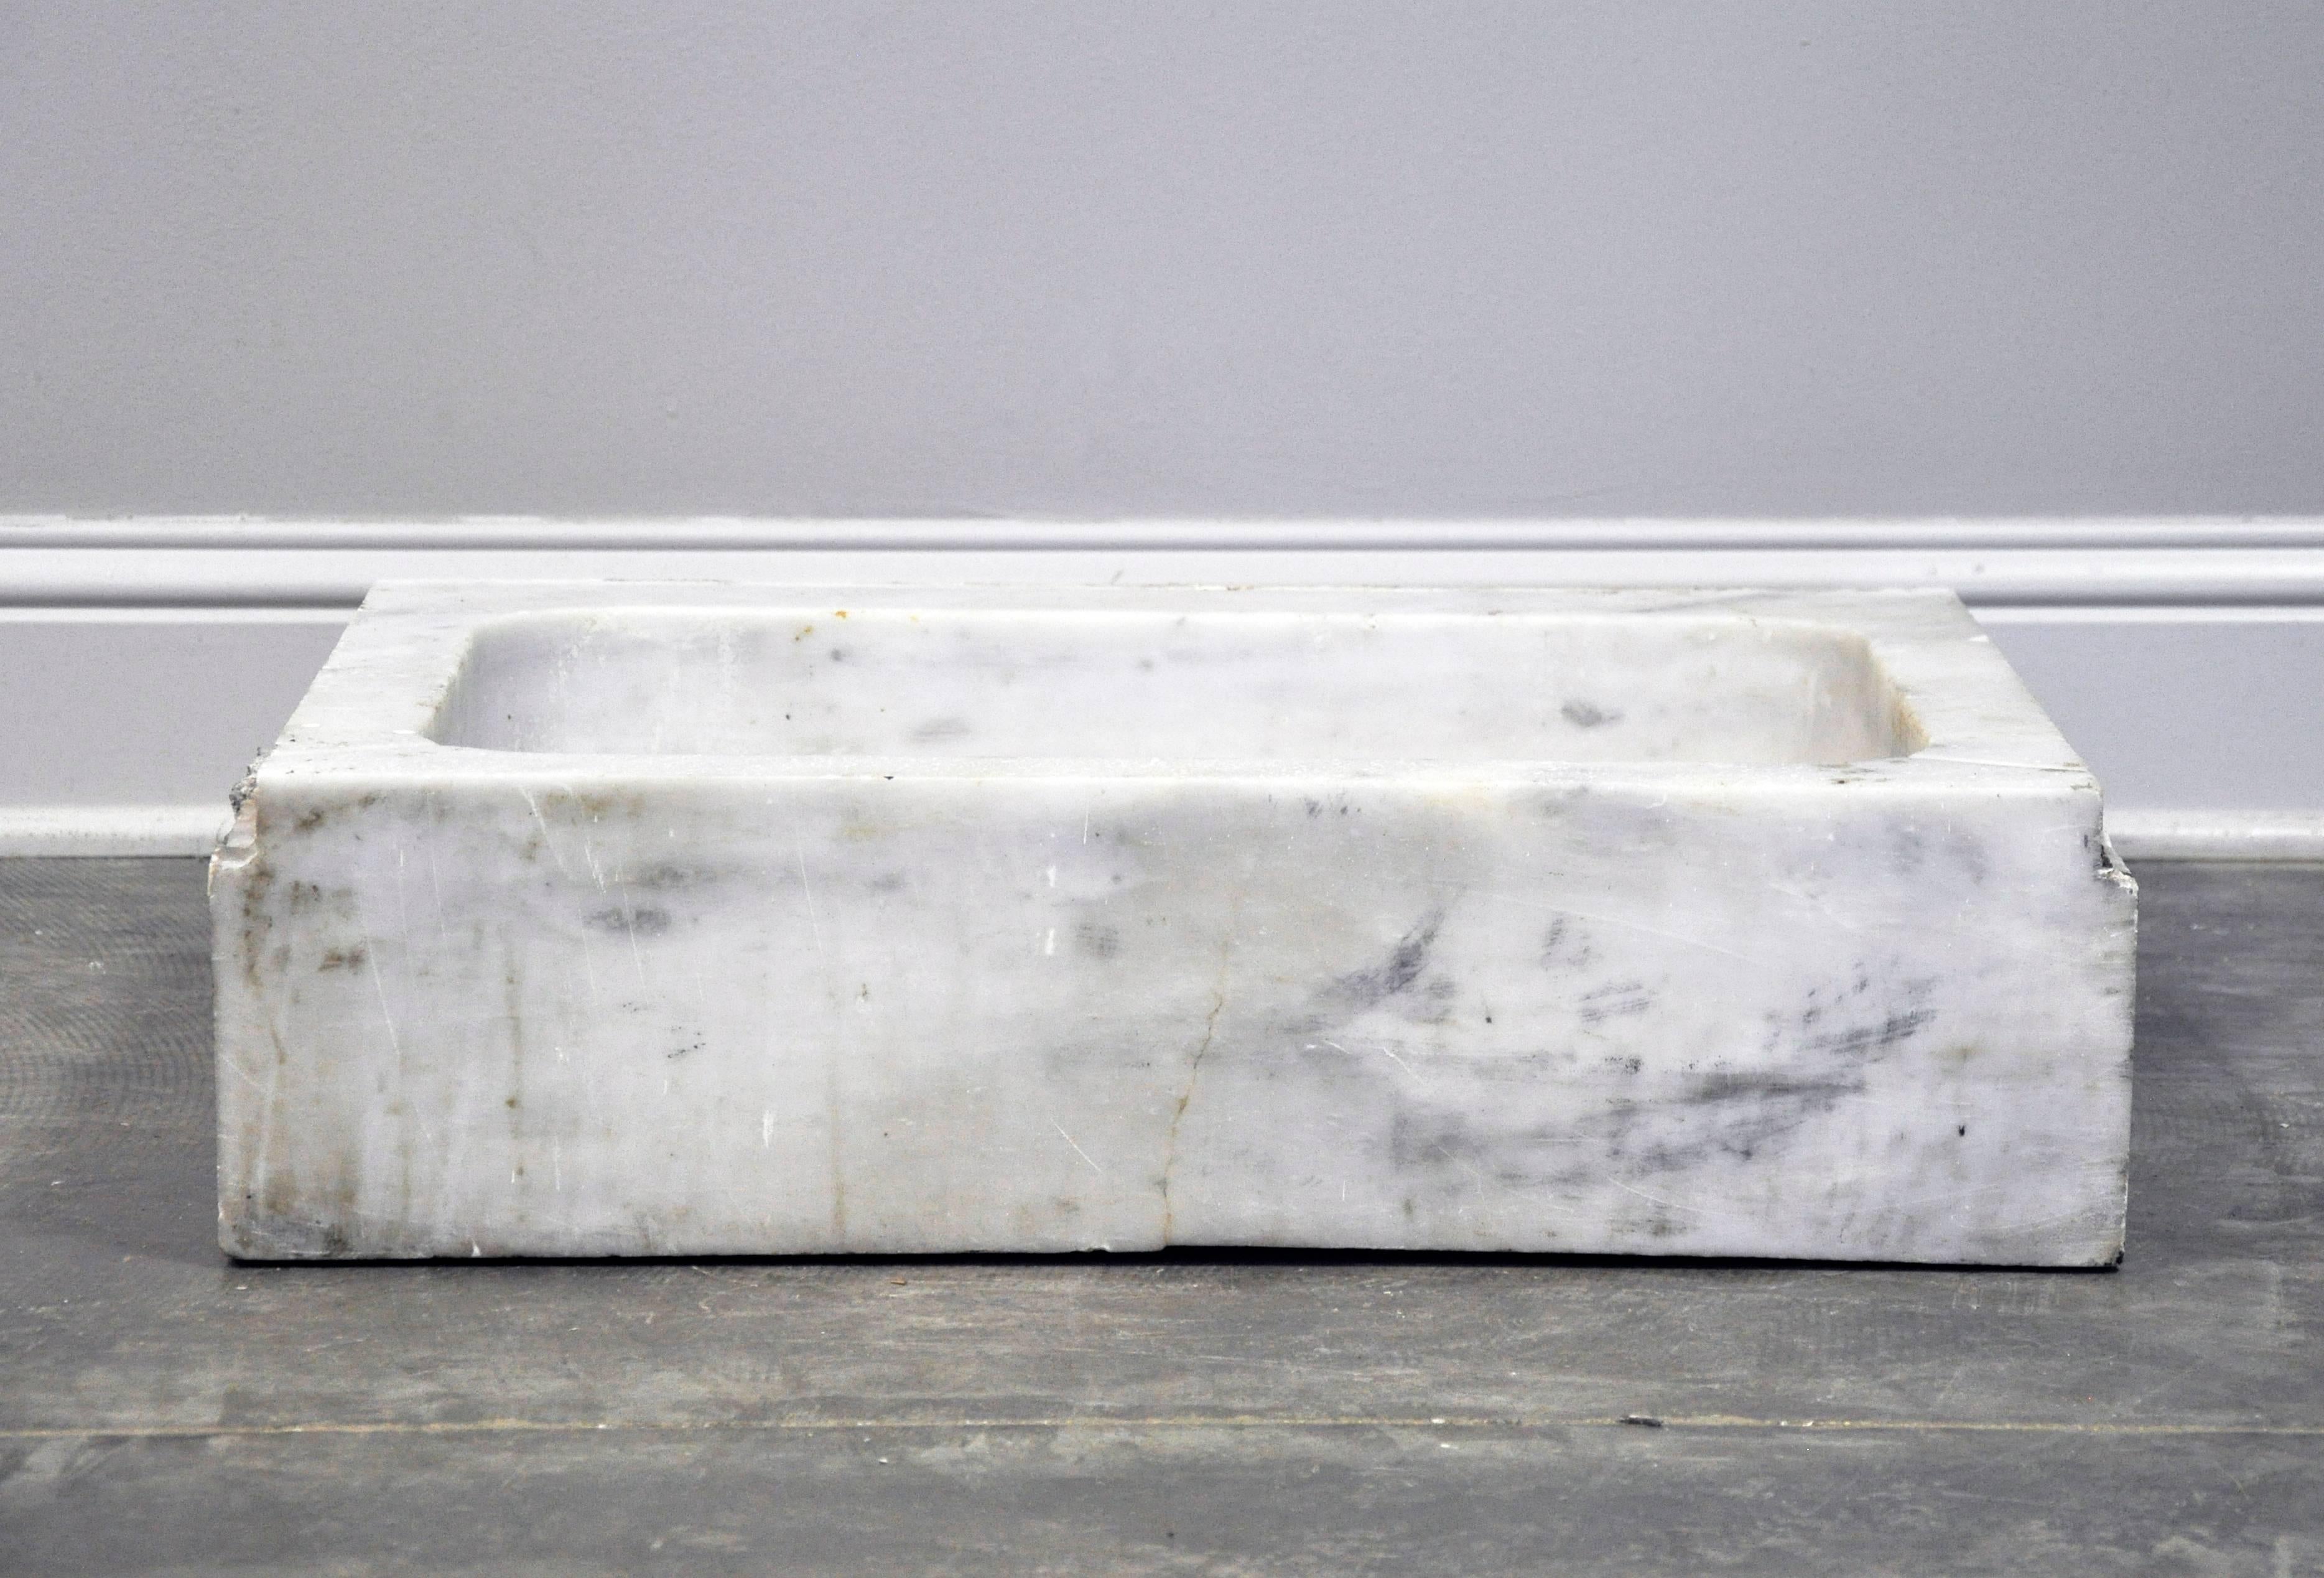 Fabulous vintage sink basin in white marble. Four smooth-cut sides with beautiful grey veining. Estimated 1920s-1930s when running water became prevalent in homes. Includes pre-cut hole for drainage fixture. Inside measurements are 21 1/4